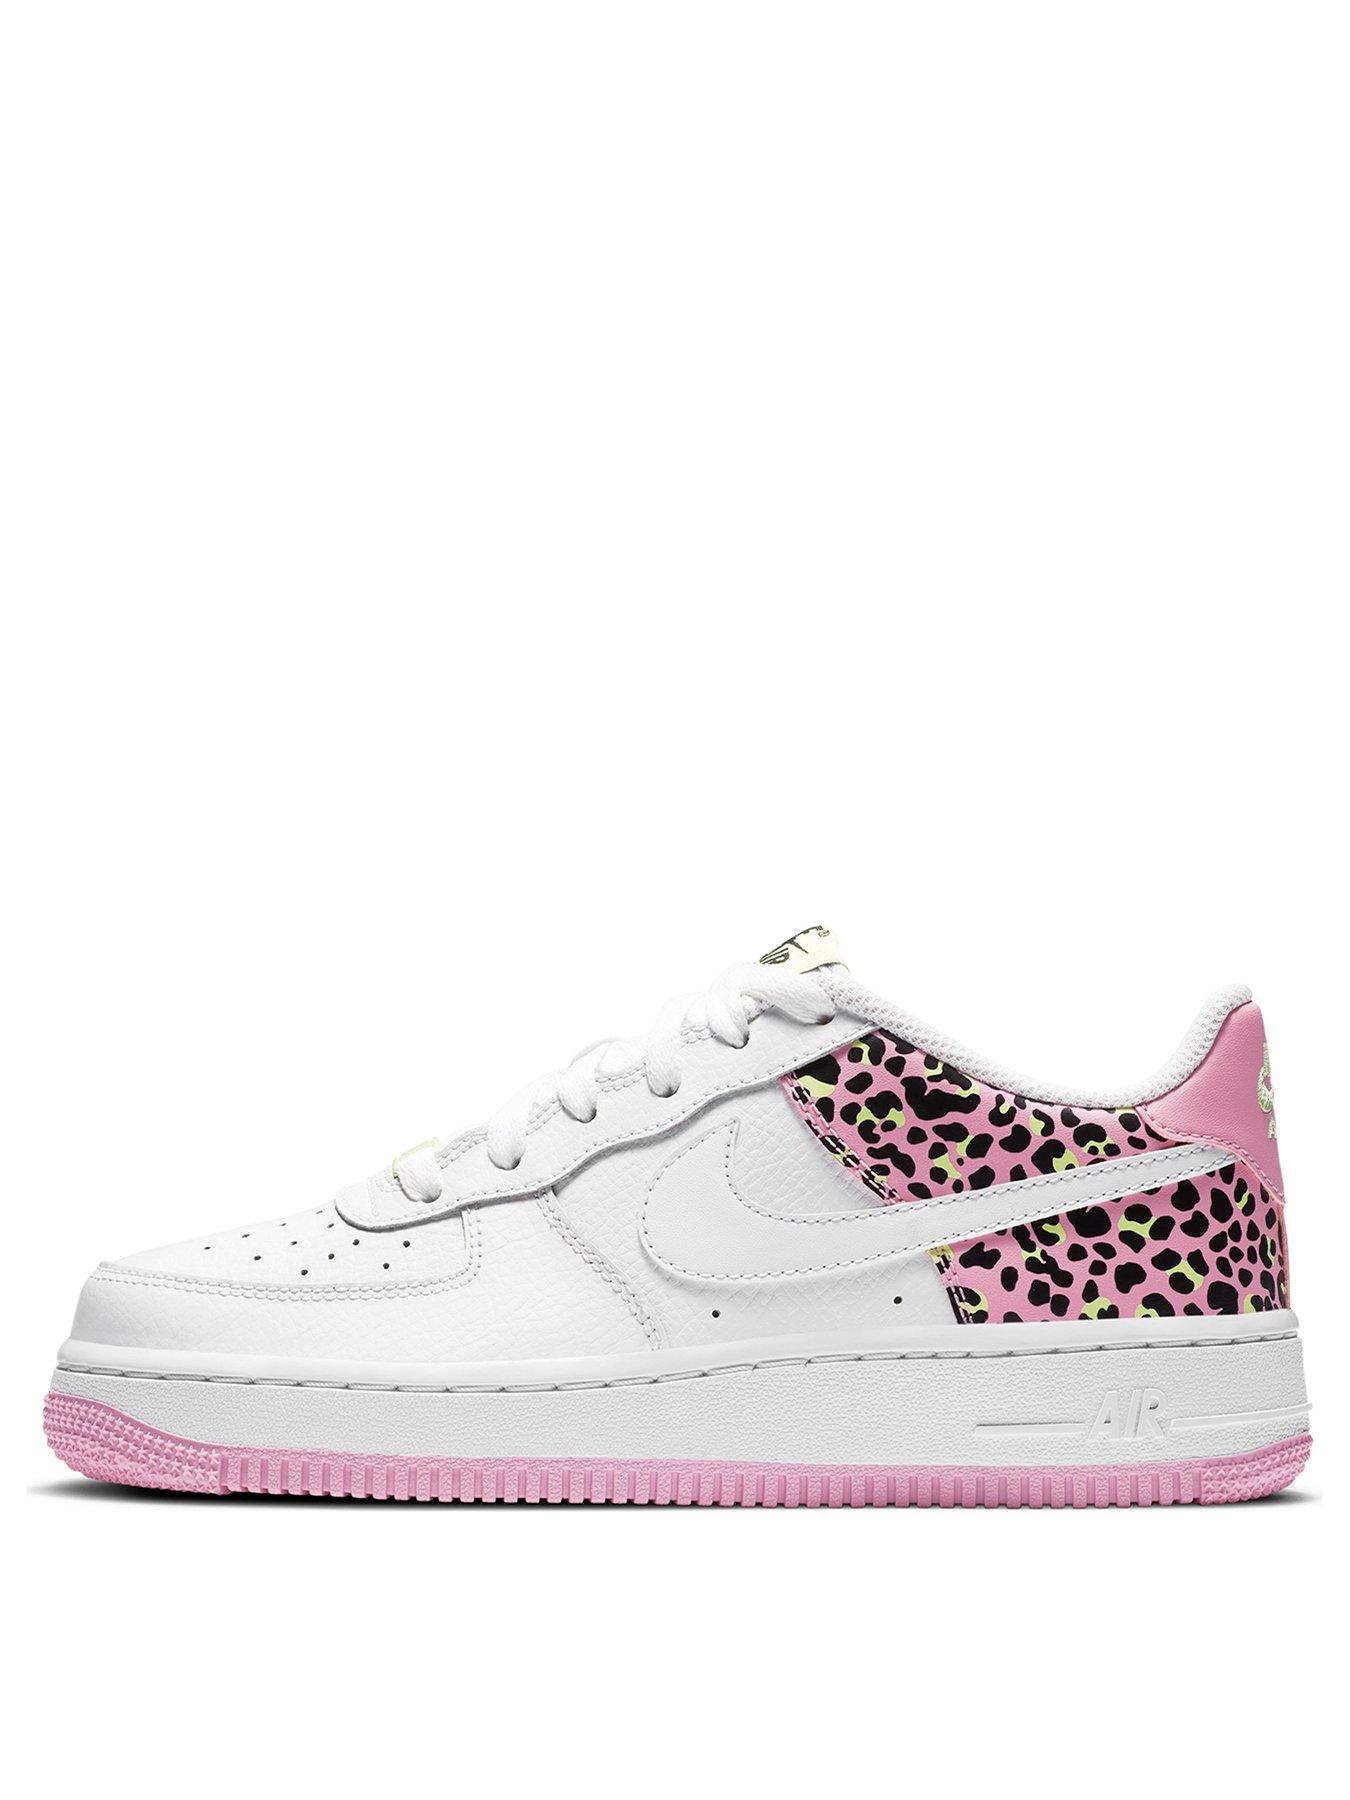 air force 1 junior size 3